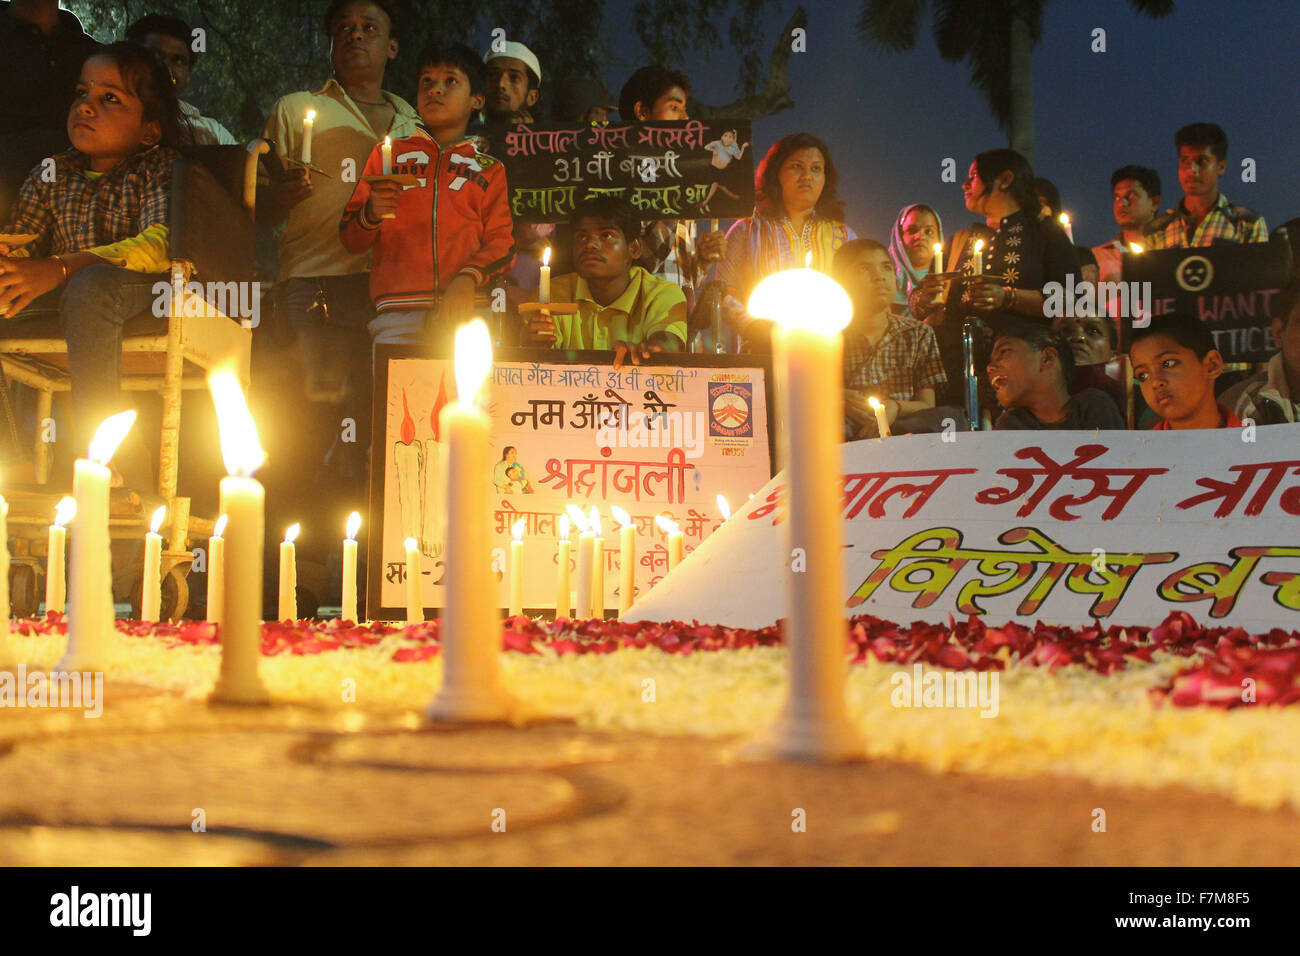 Bhopal, India. 1st Dec, 2015. People light candles during a vigil marking the 31st anniversary of the gas tragedy in Bhopal, India, Dec. 1, 2015. More than 15,000 residents were killed by the gas leakage from the Union Carbide pesticide plant on the night of Dec. 2 to 3, 1984 in Bhopal, considered the world's worst industrial disaster. © Stringer/Xinhua/Alamy Live News Stock Photo